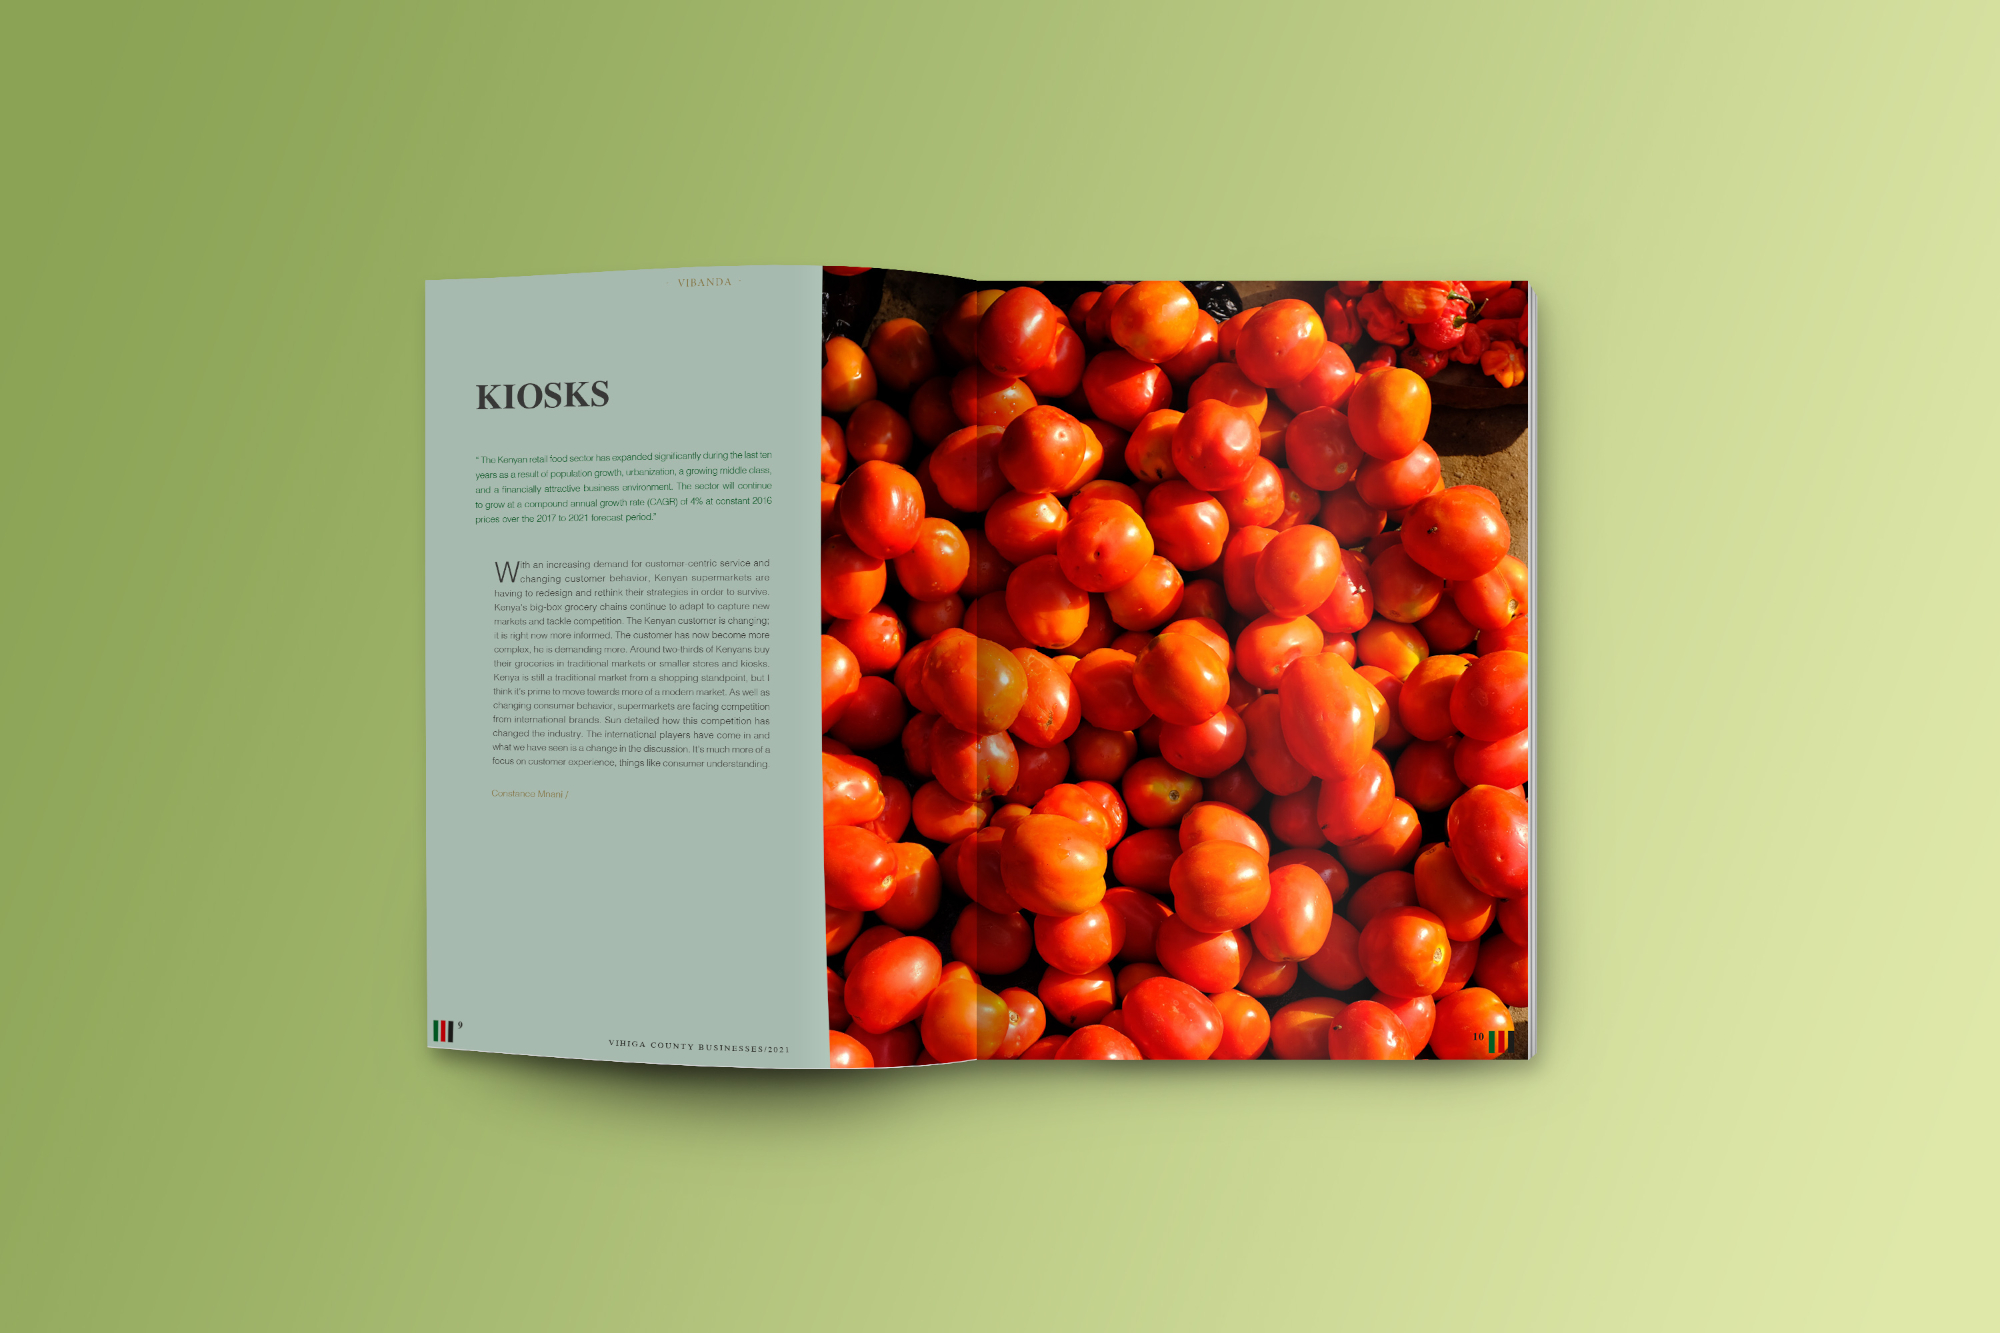 Cihiga journal page spread for 'Groceries' with photo of tomatoes